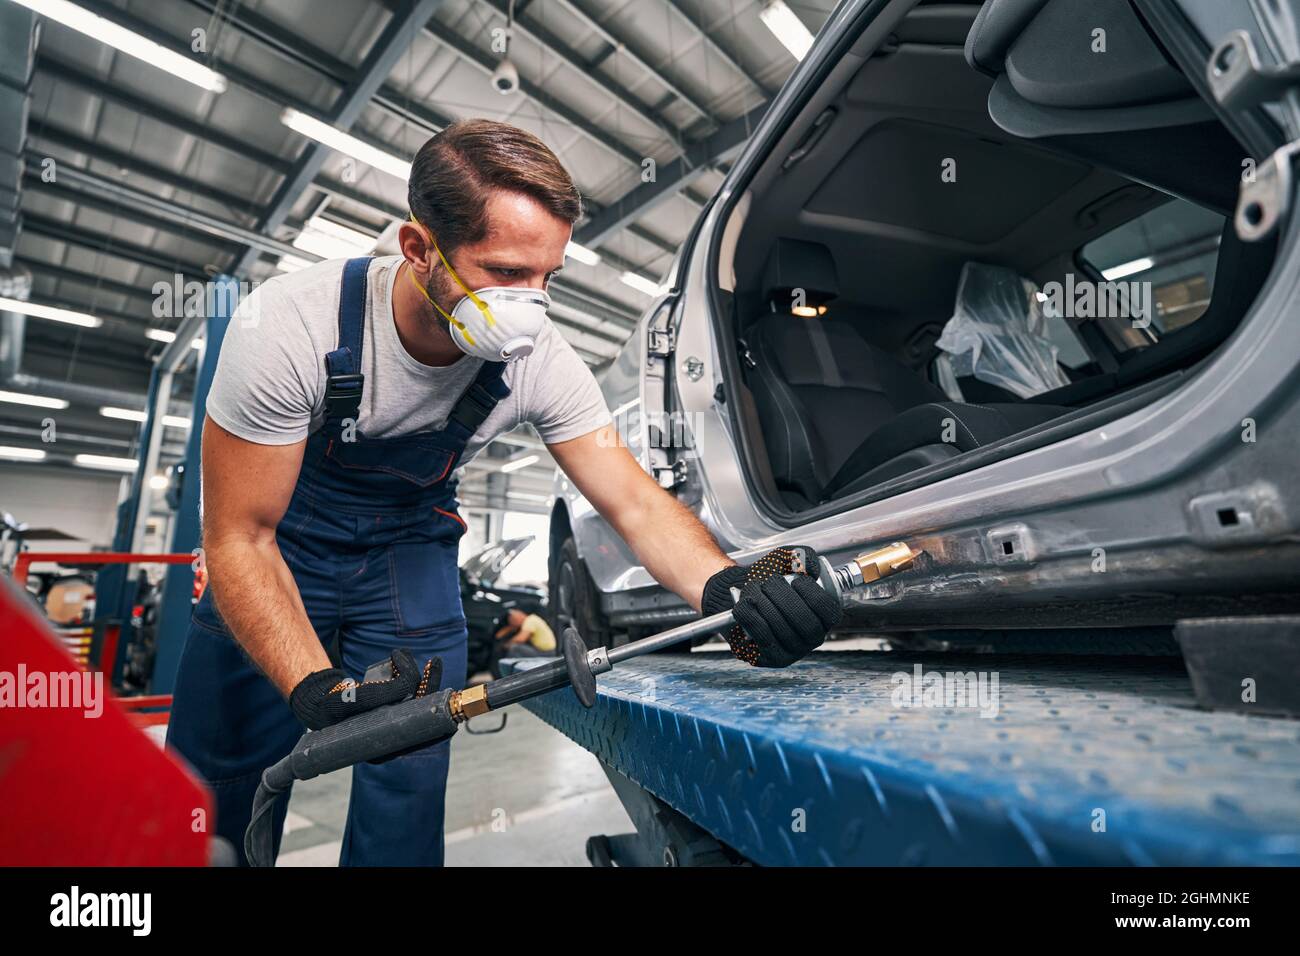 Mechanic removing dents from rear part of car Stock Photo